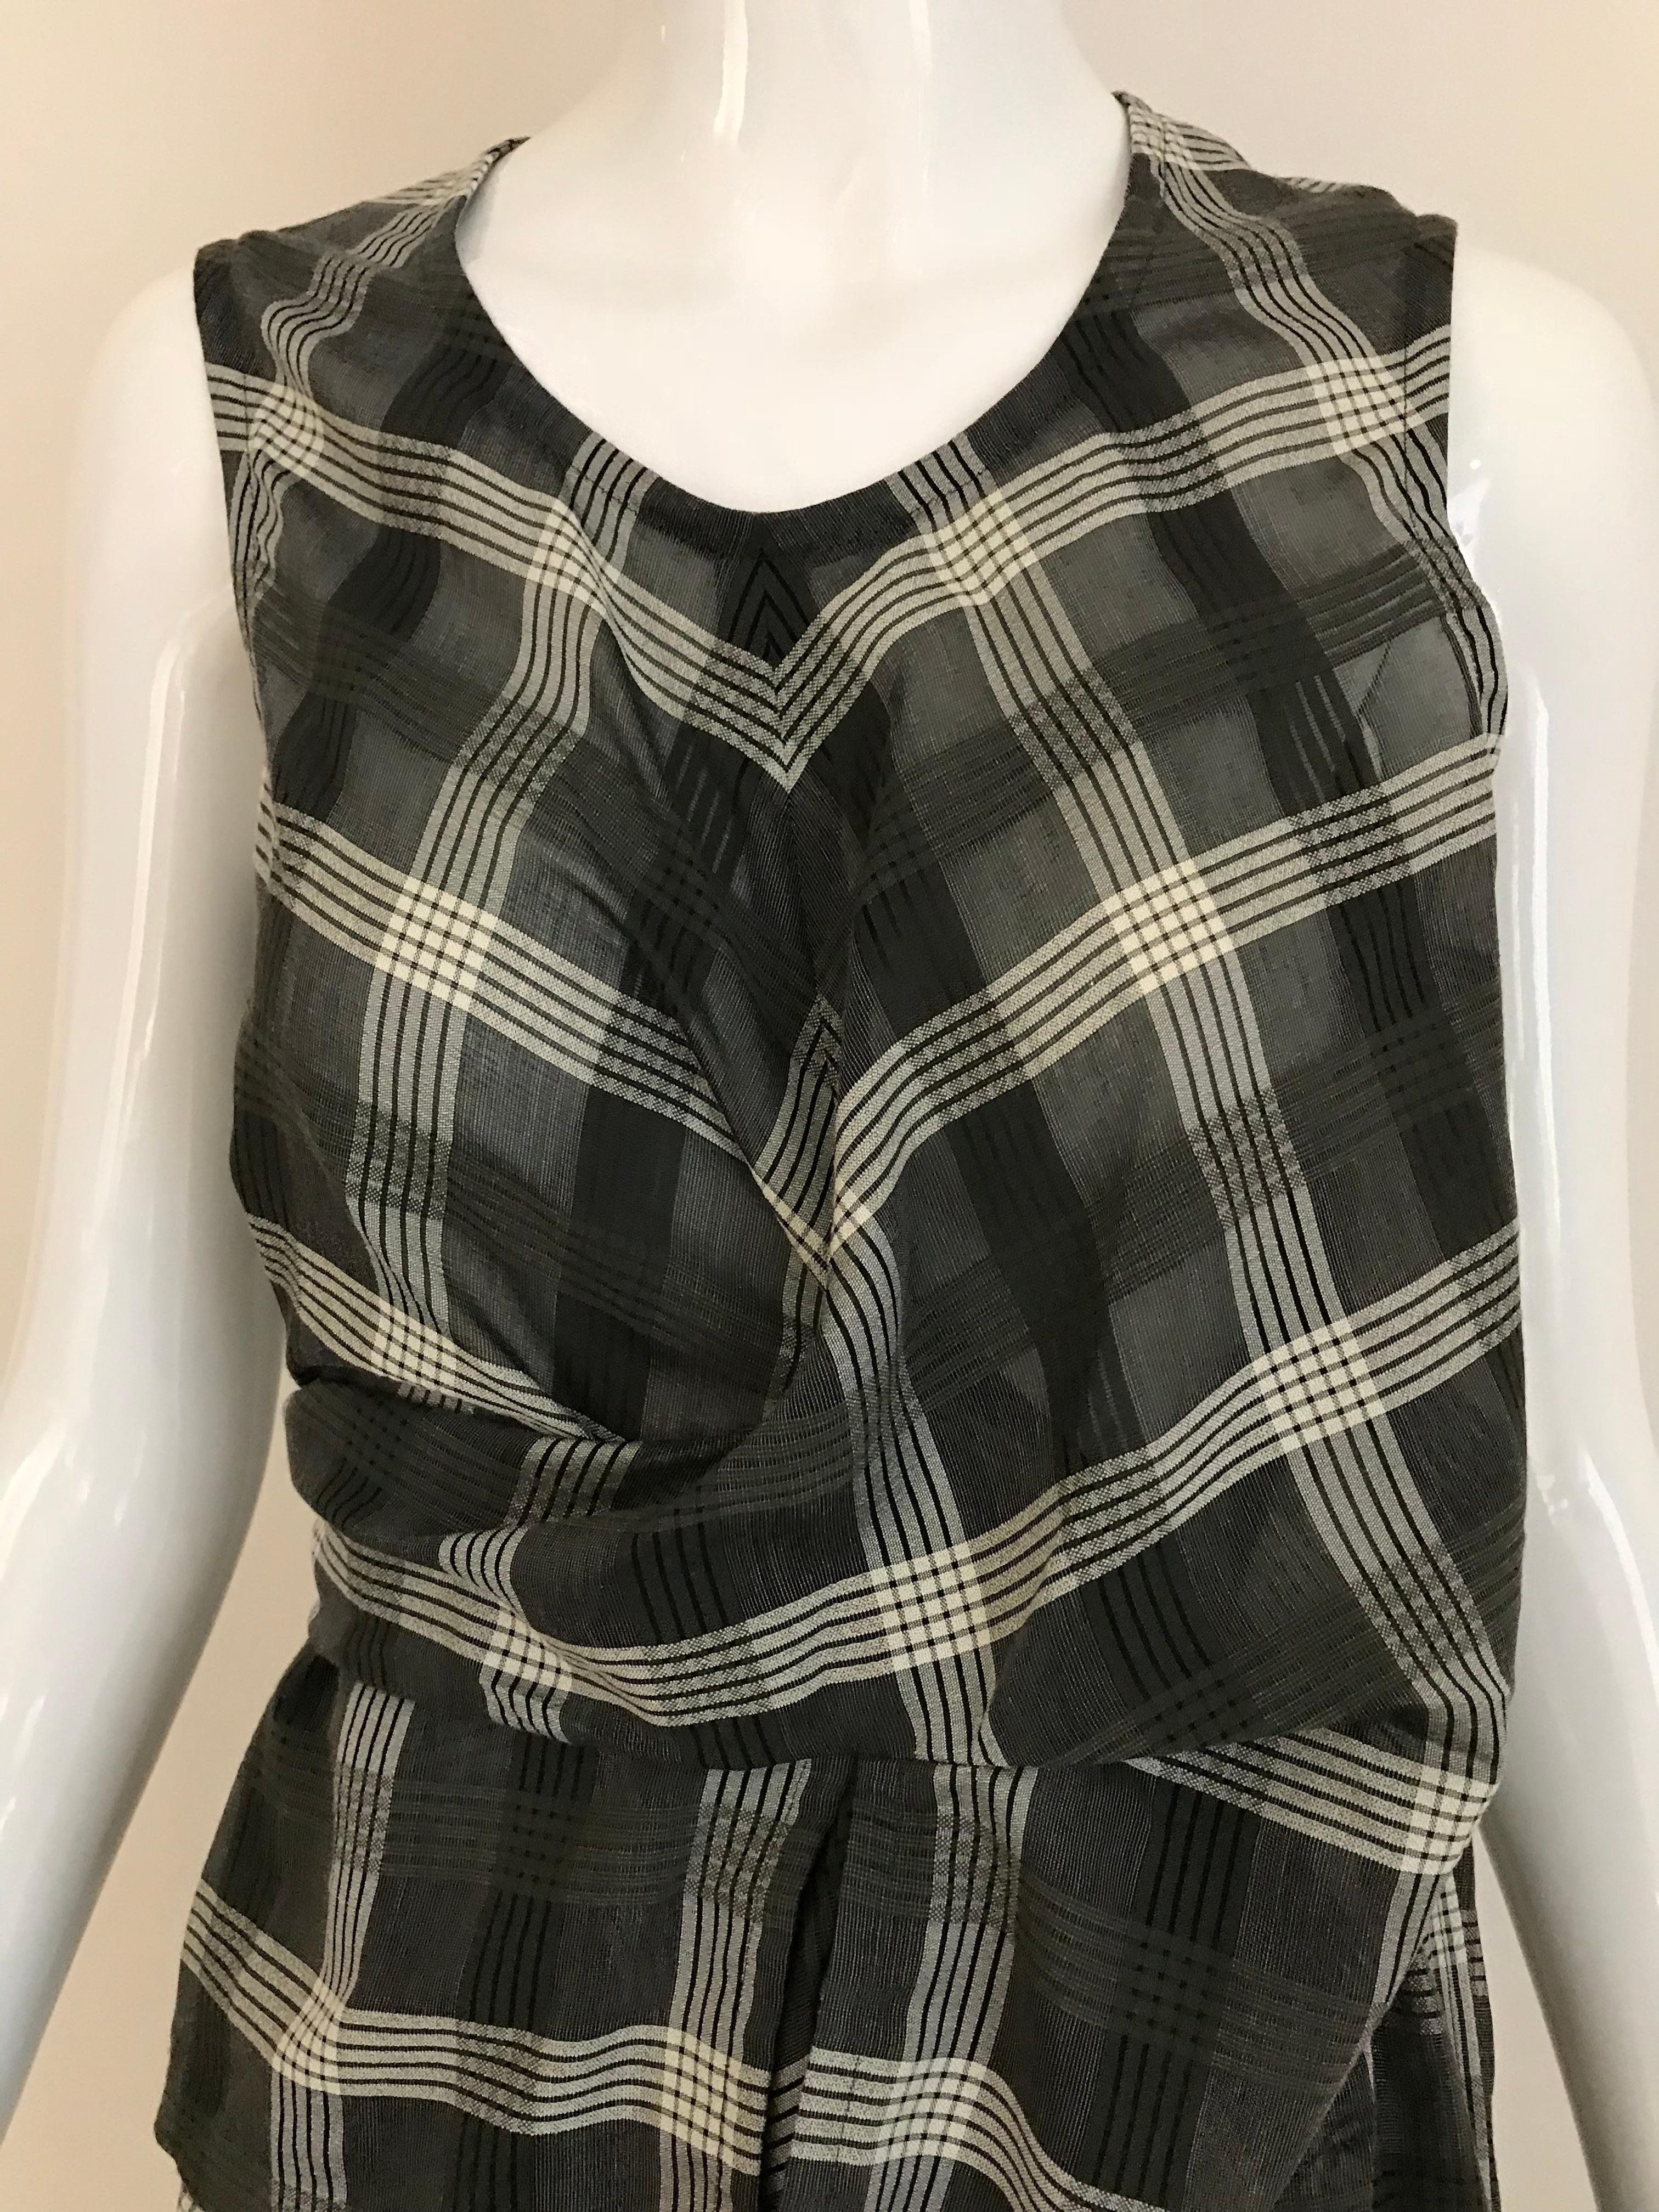 Comme does Garçons Grey and white plaid sleeveless cotton dress.
Size: small - 2/4 